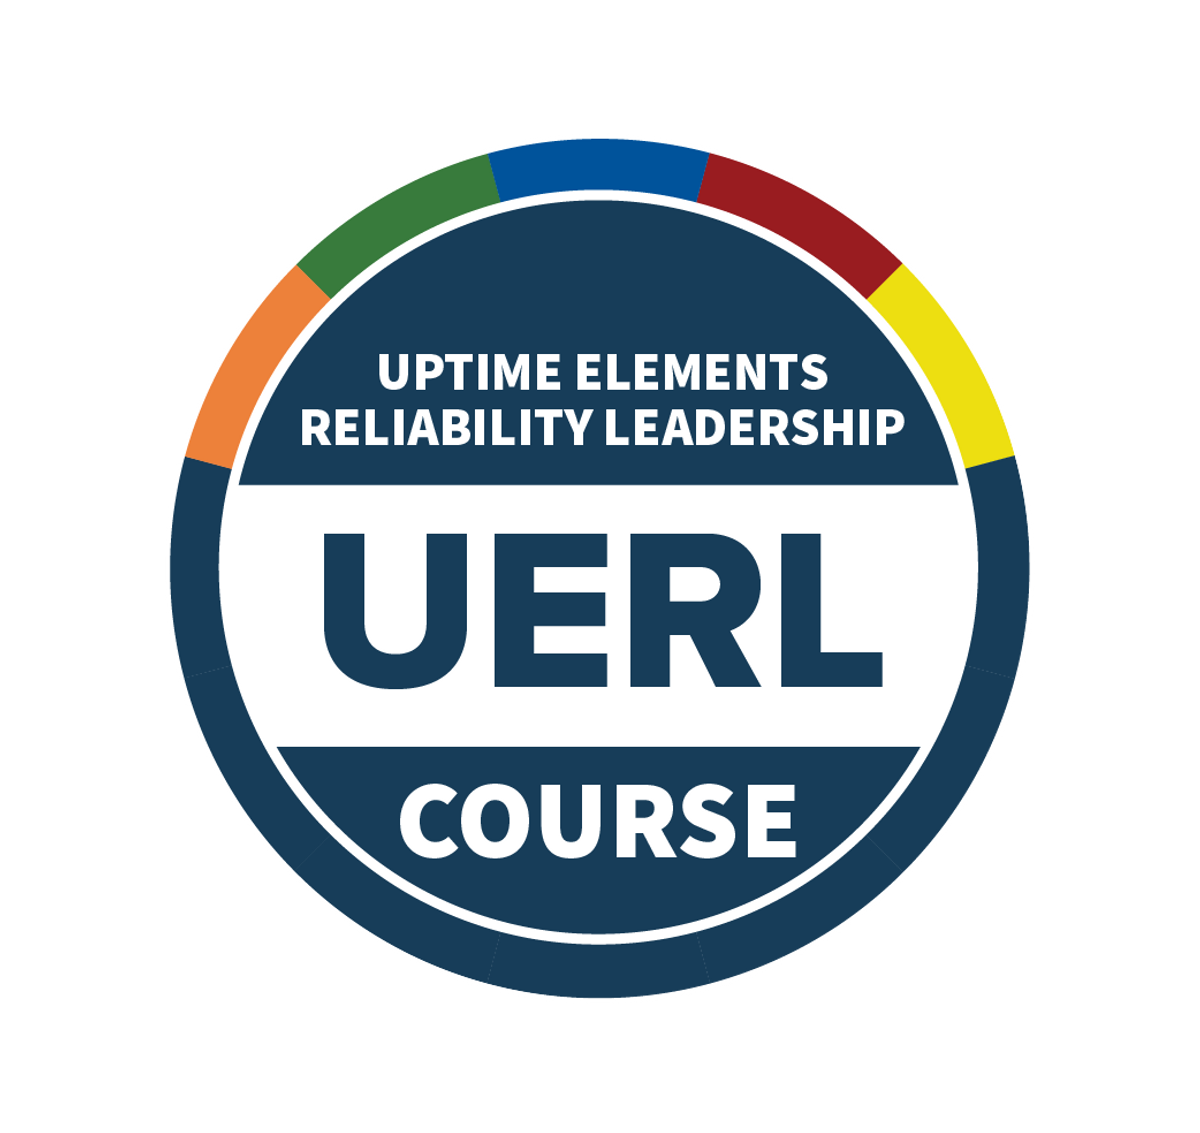 Uptime Elements Reliability Leadership Course - United Kingdom Time Zone (formerly CRL)